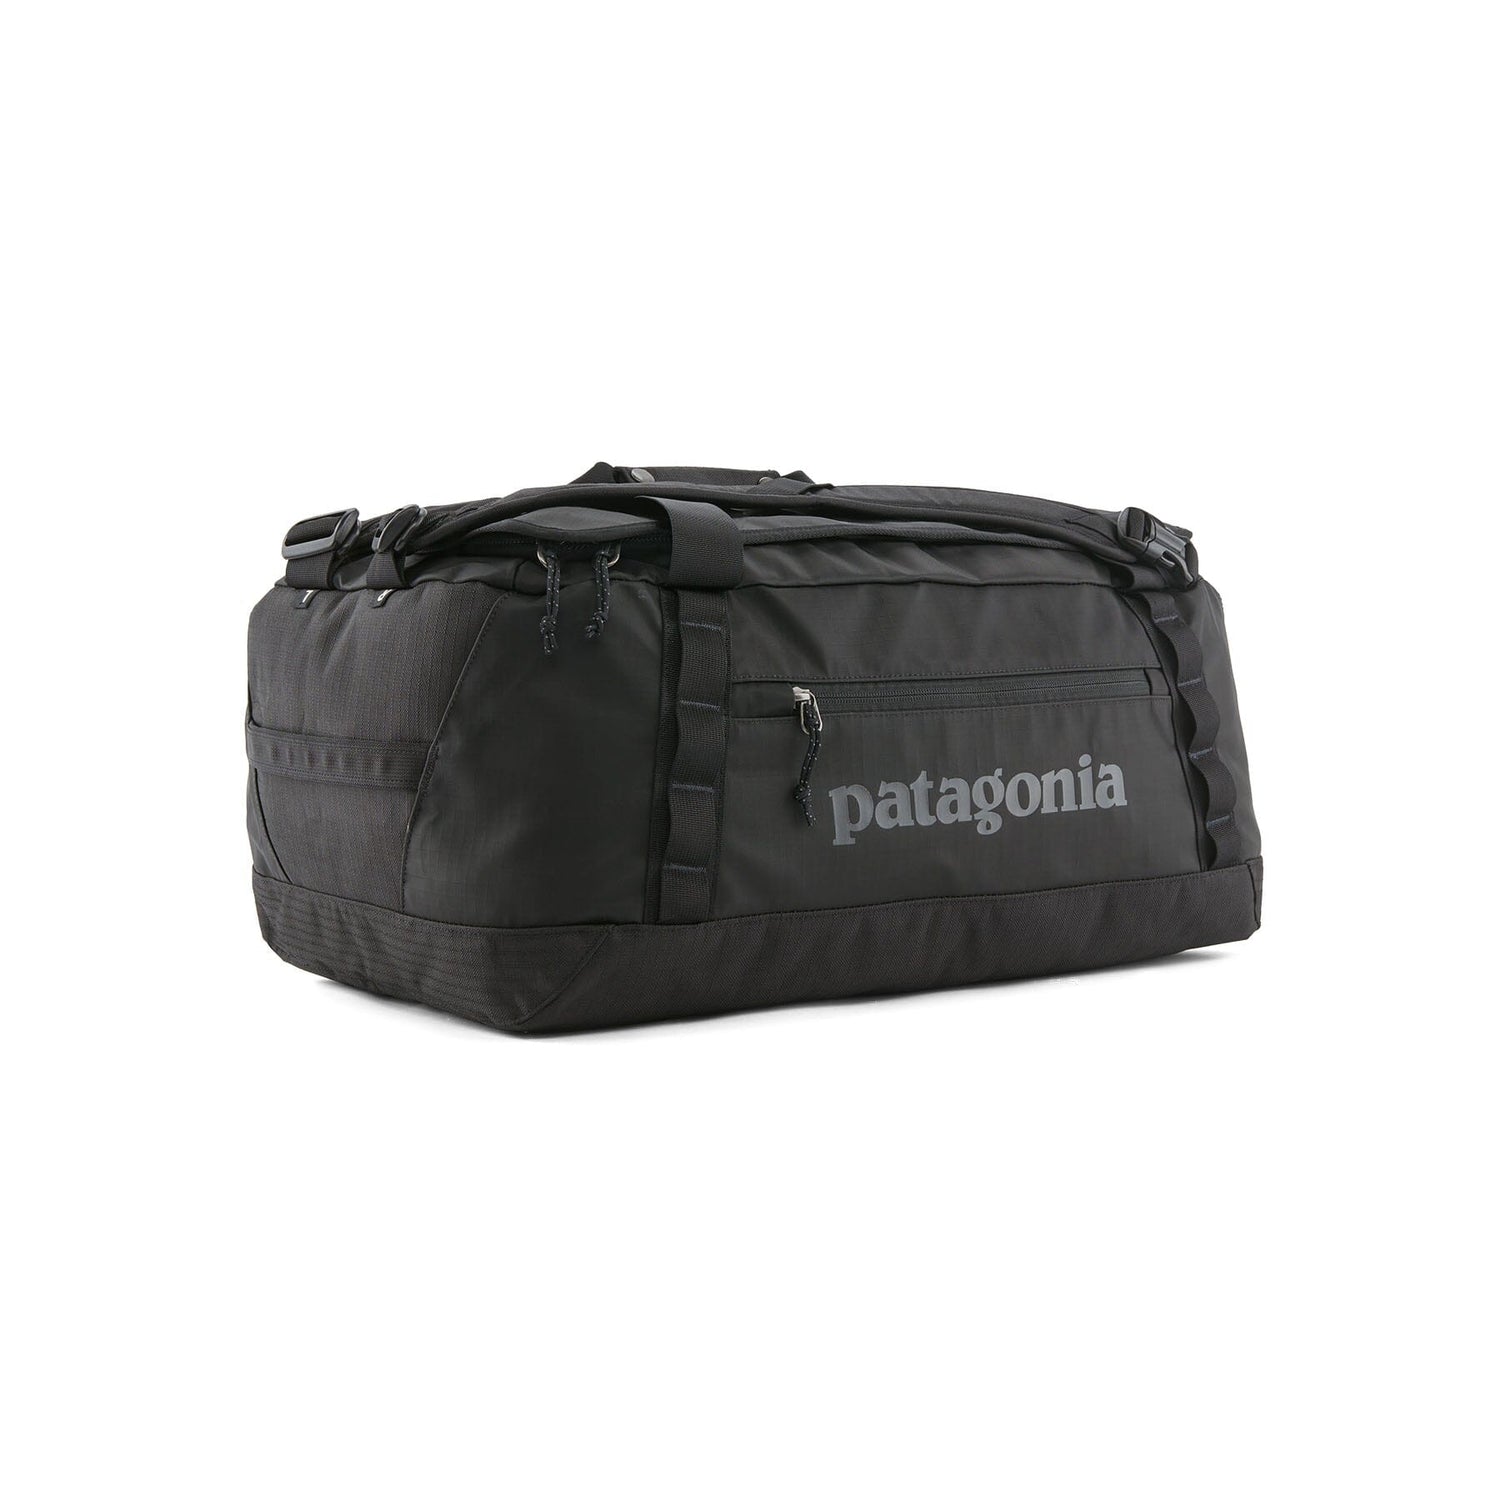 Patagonia Black Hole Duffel 40L - 100% postconsumer recycled polyester Black Bags